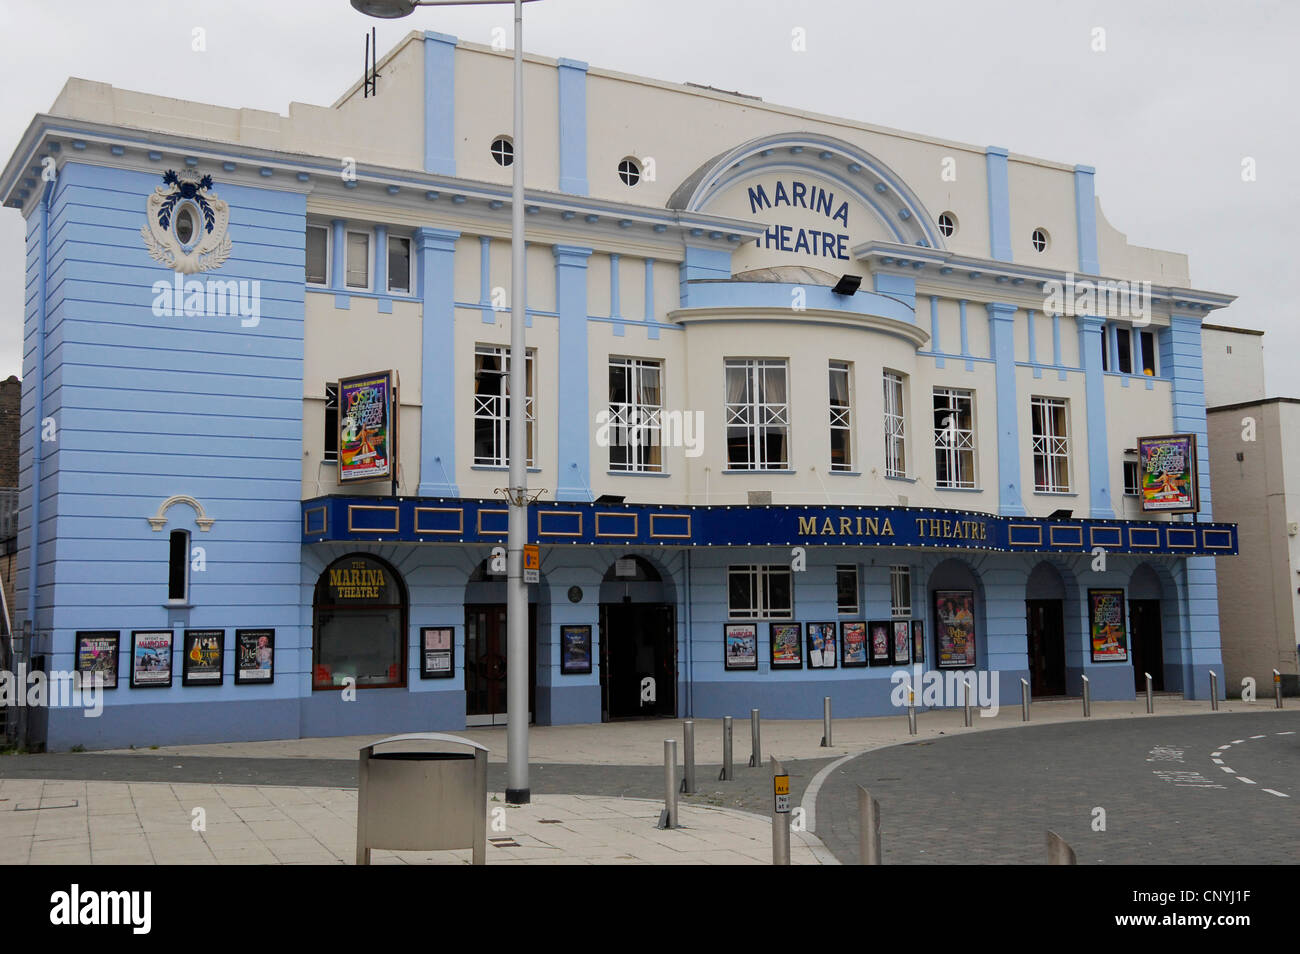 Lowestoft - Marina Theatre - Victorian skating rink - theatre 1878 - rebuilt 1901 + 1930 - now owned by Marina Theatre Trust Stock Photo